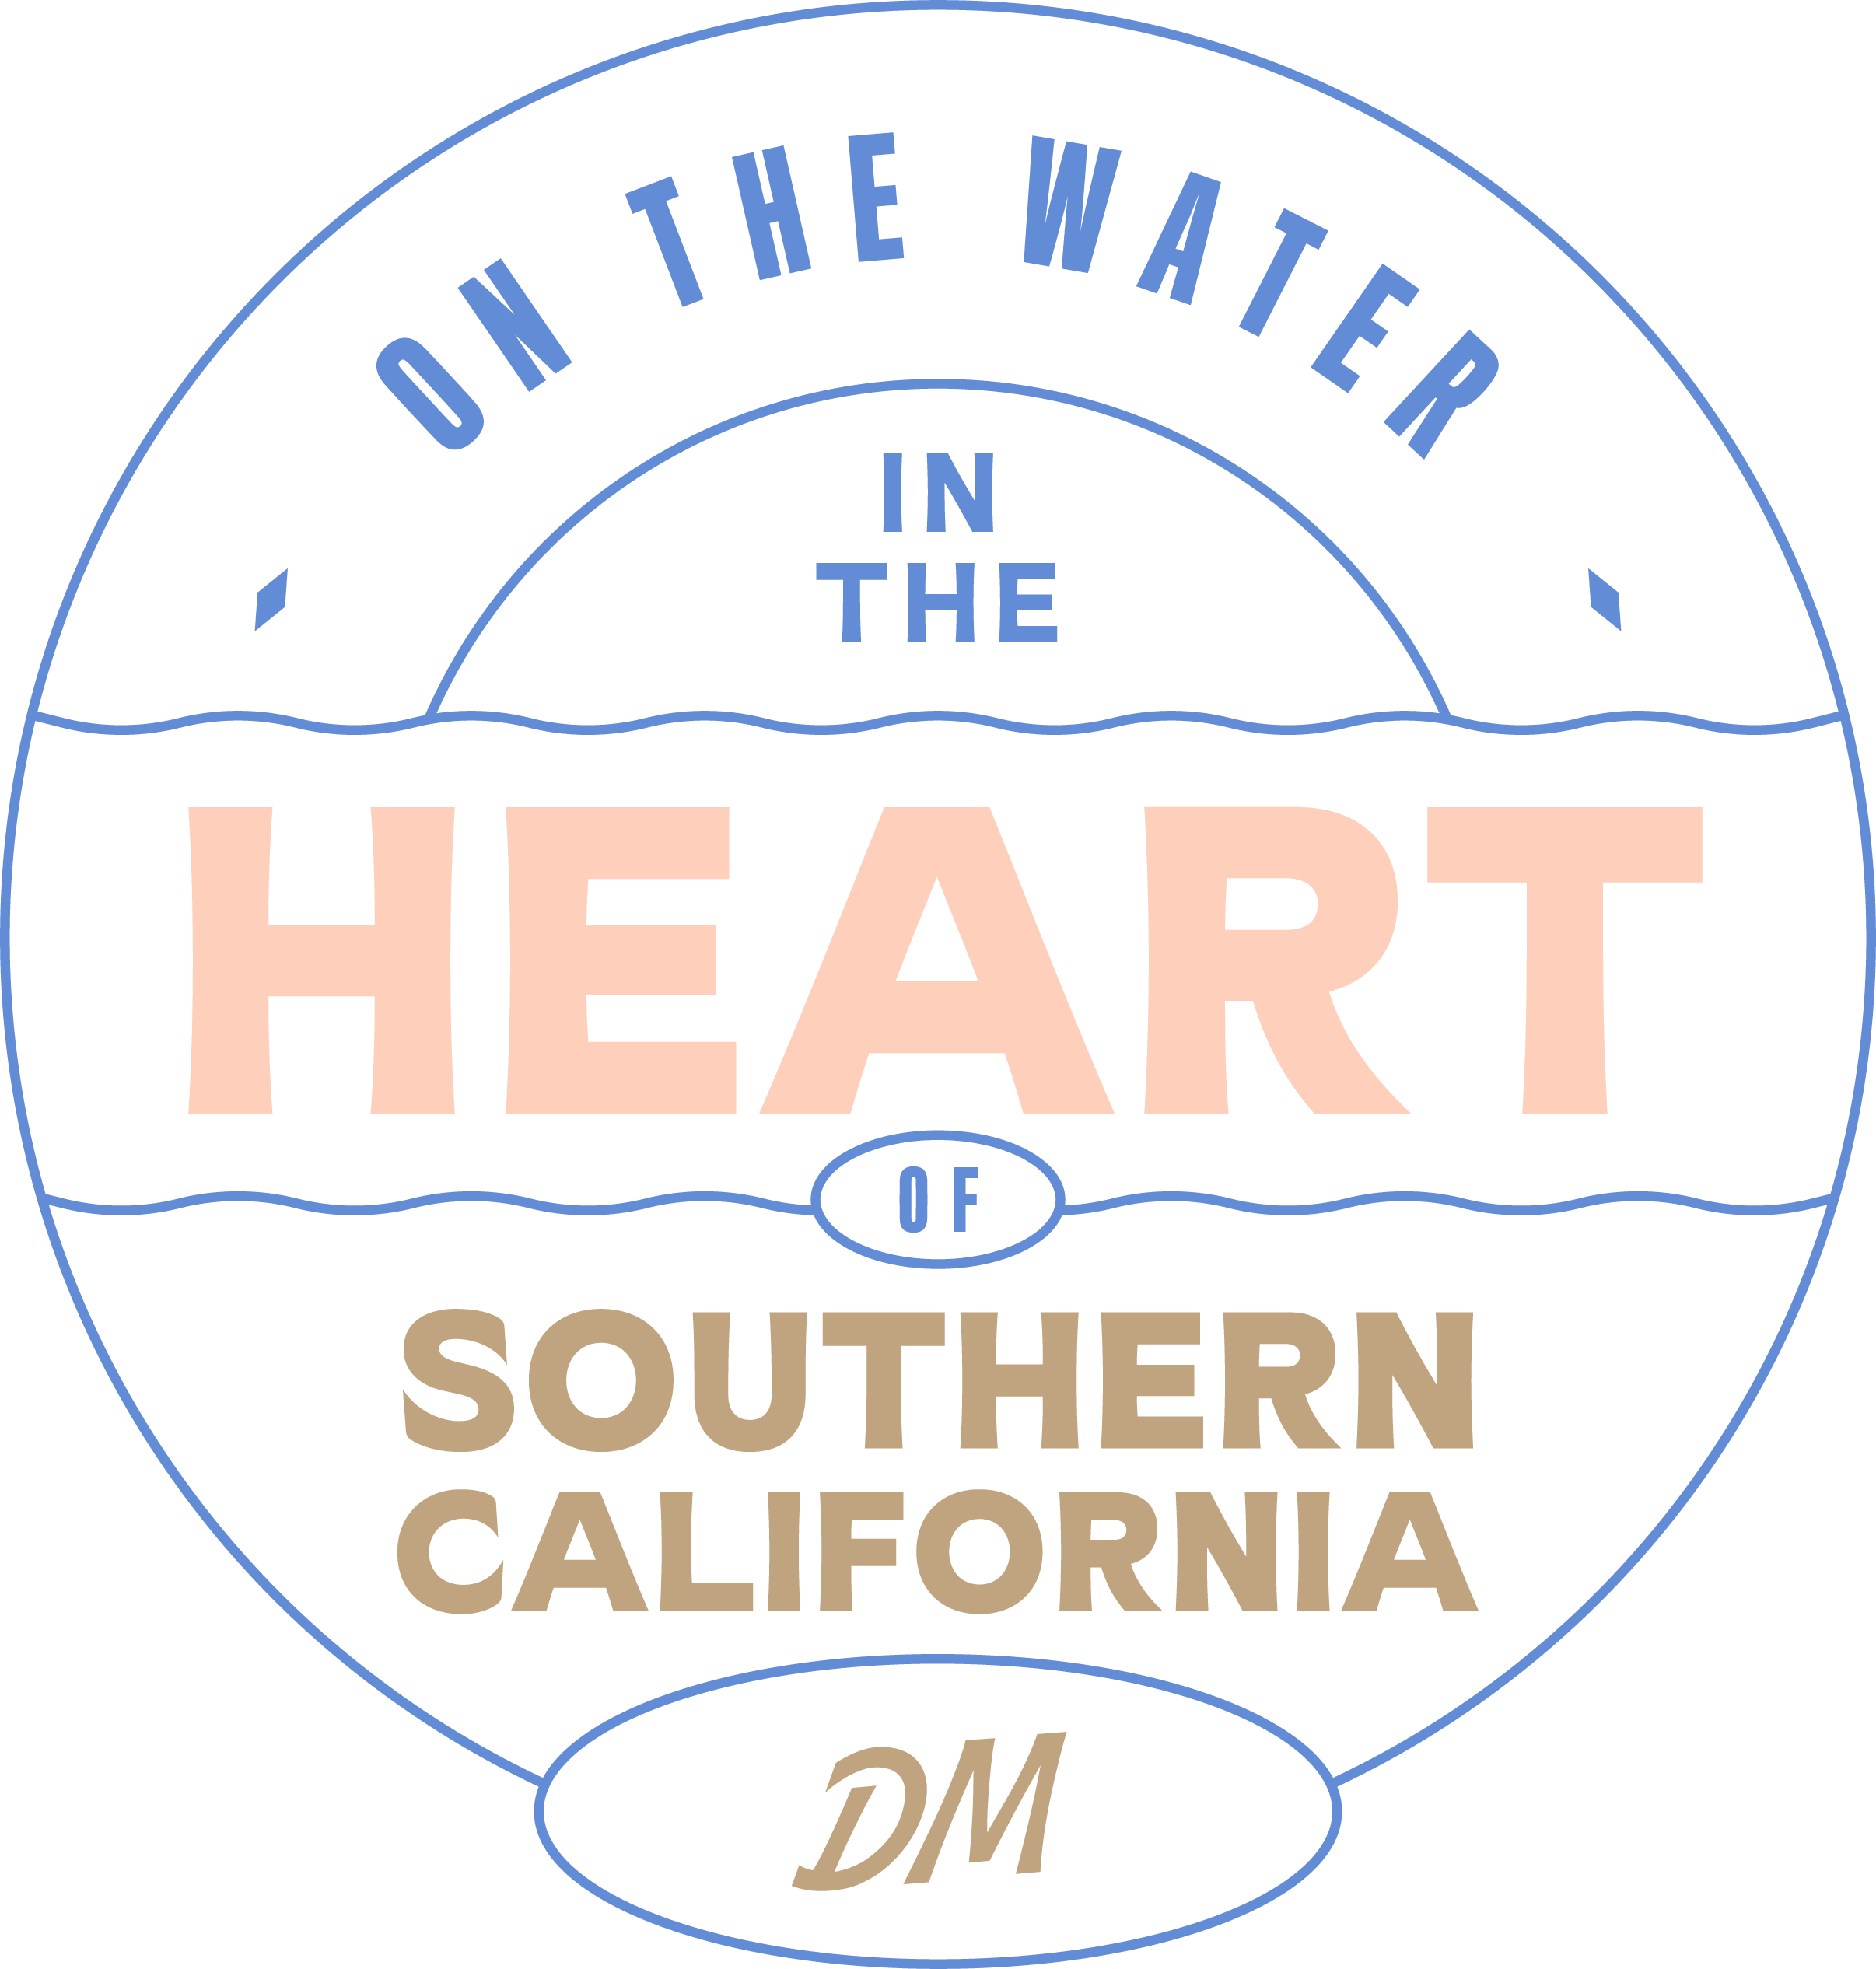 Decorative shield with the text "On the water in the heart of southern california DM"